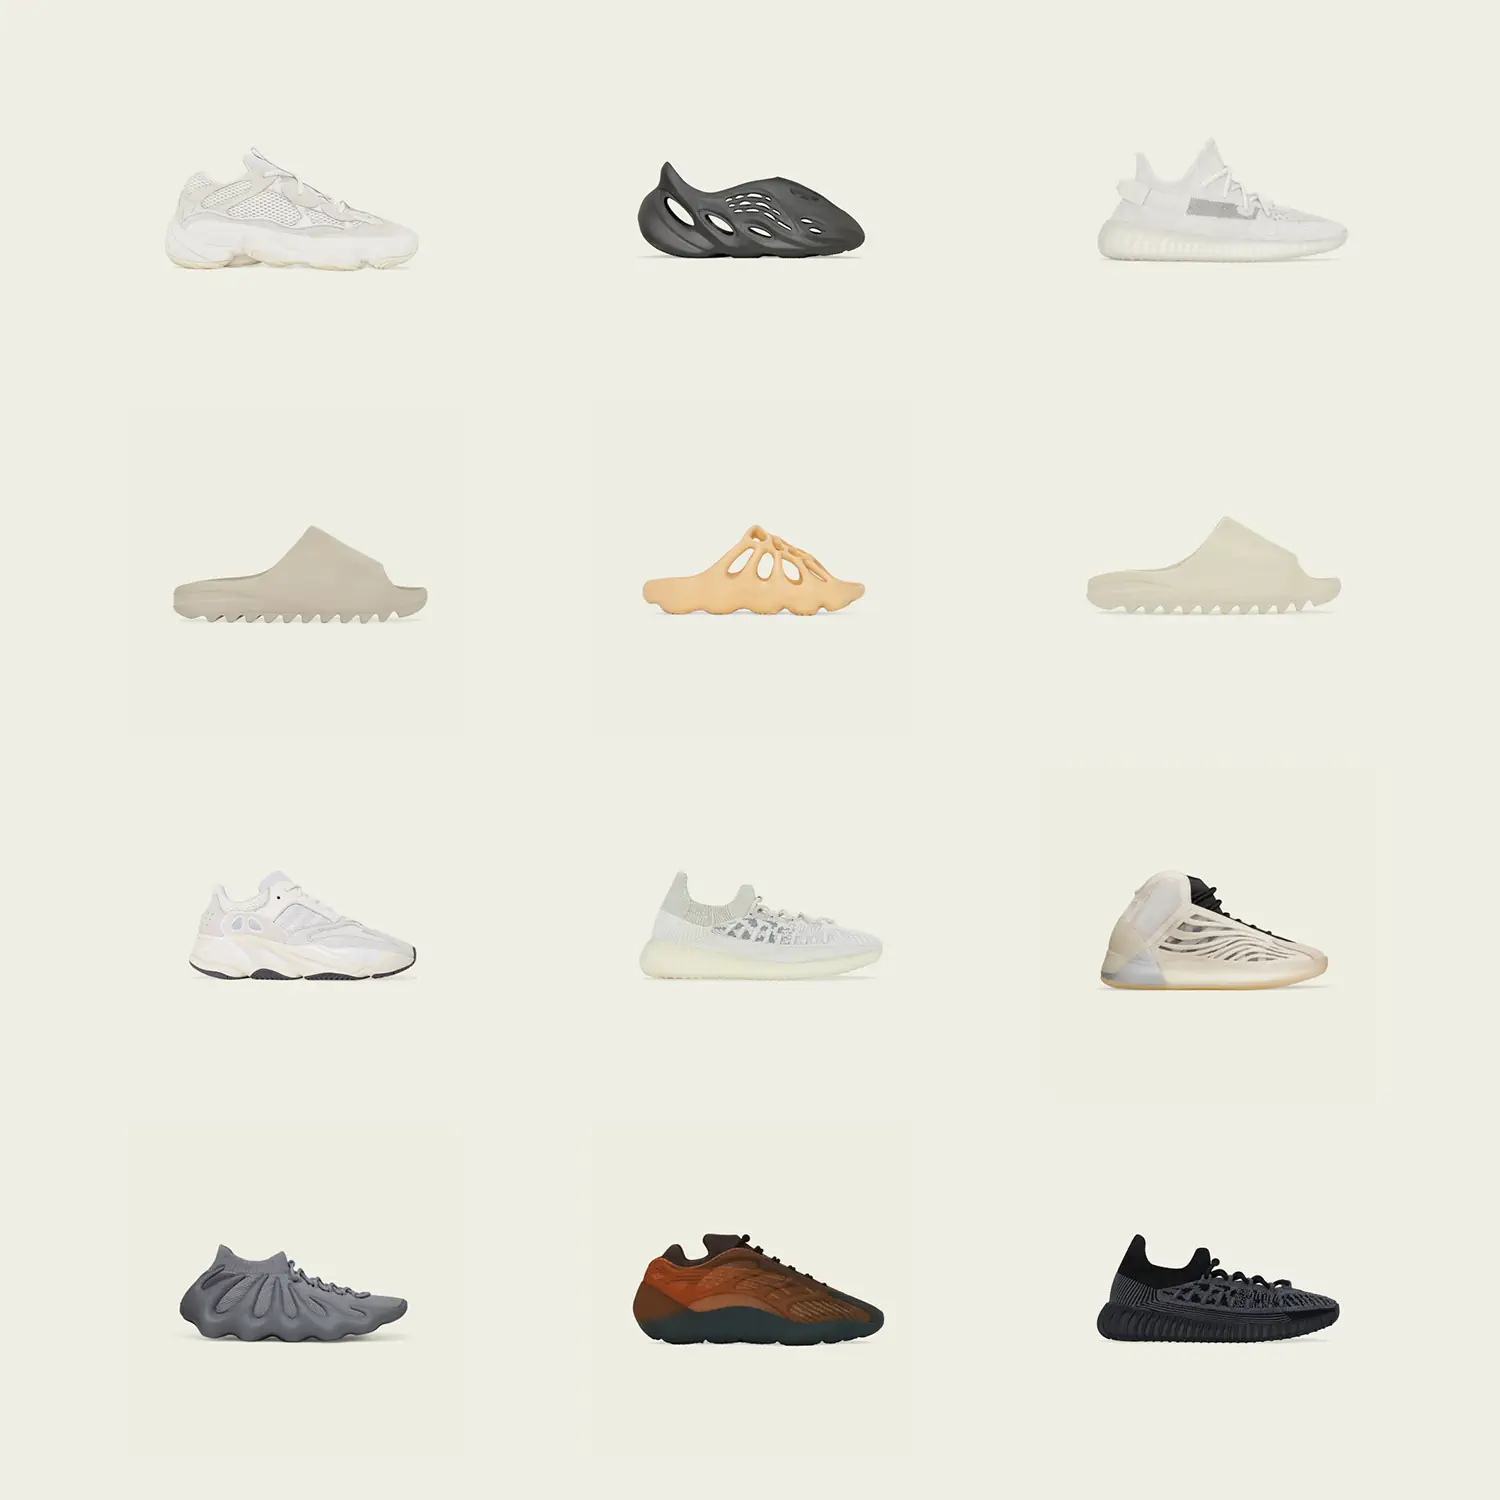 Early August marks adidas' upcoming Yeezy products release